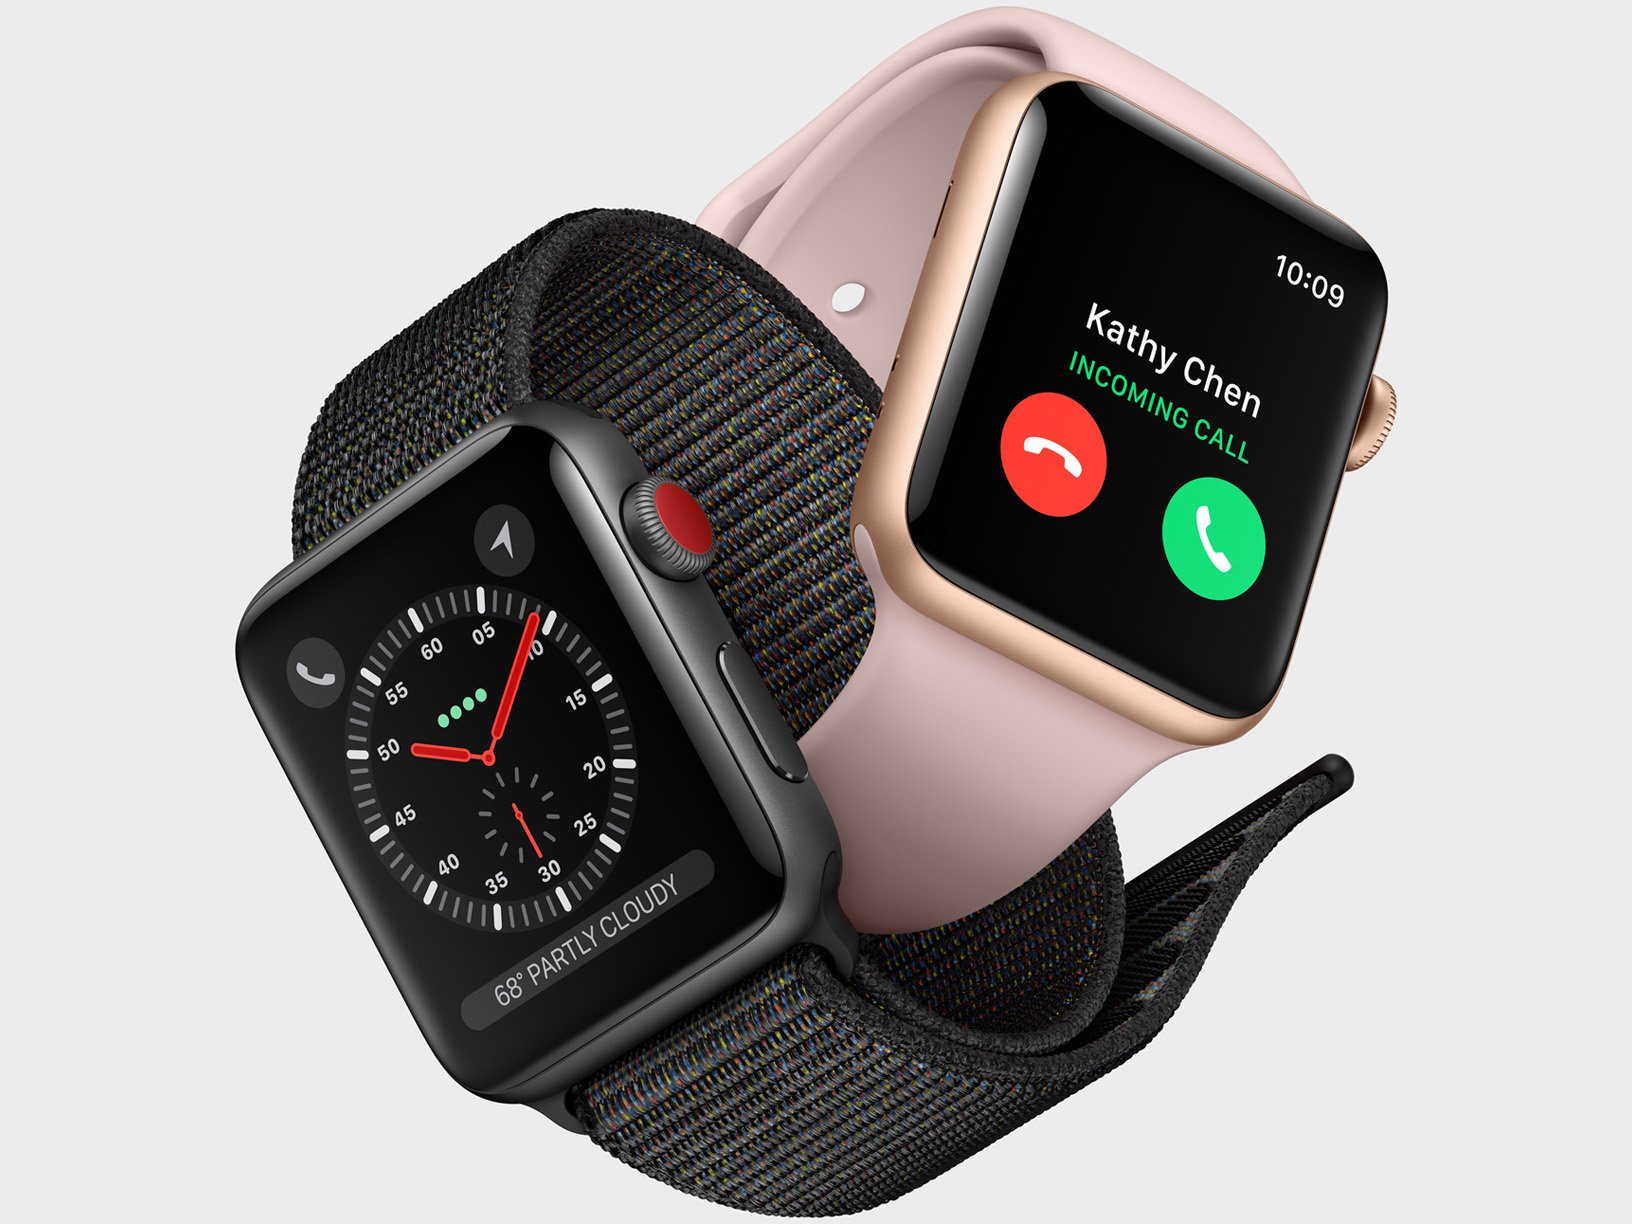 Apple Watch 3 vs Apple Watch 2: What's new? | iMore